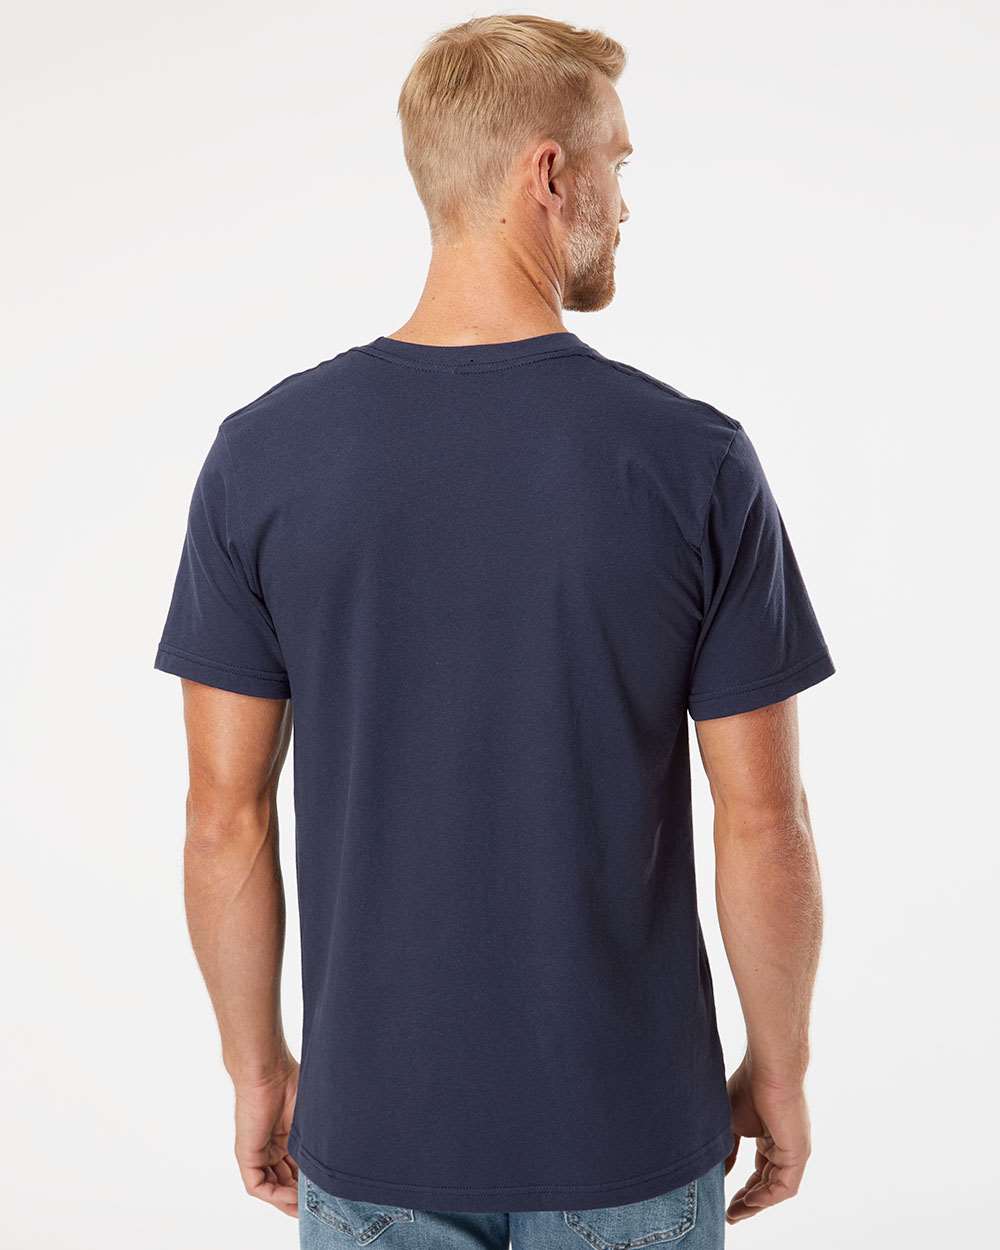 American Apparel Fine Jersey Tee 2001 #colormdl_Navy